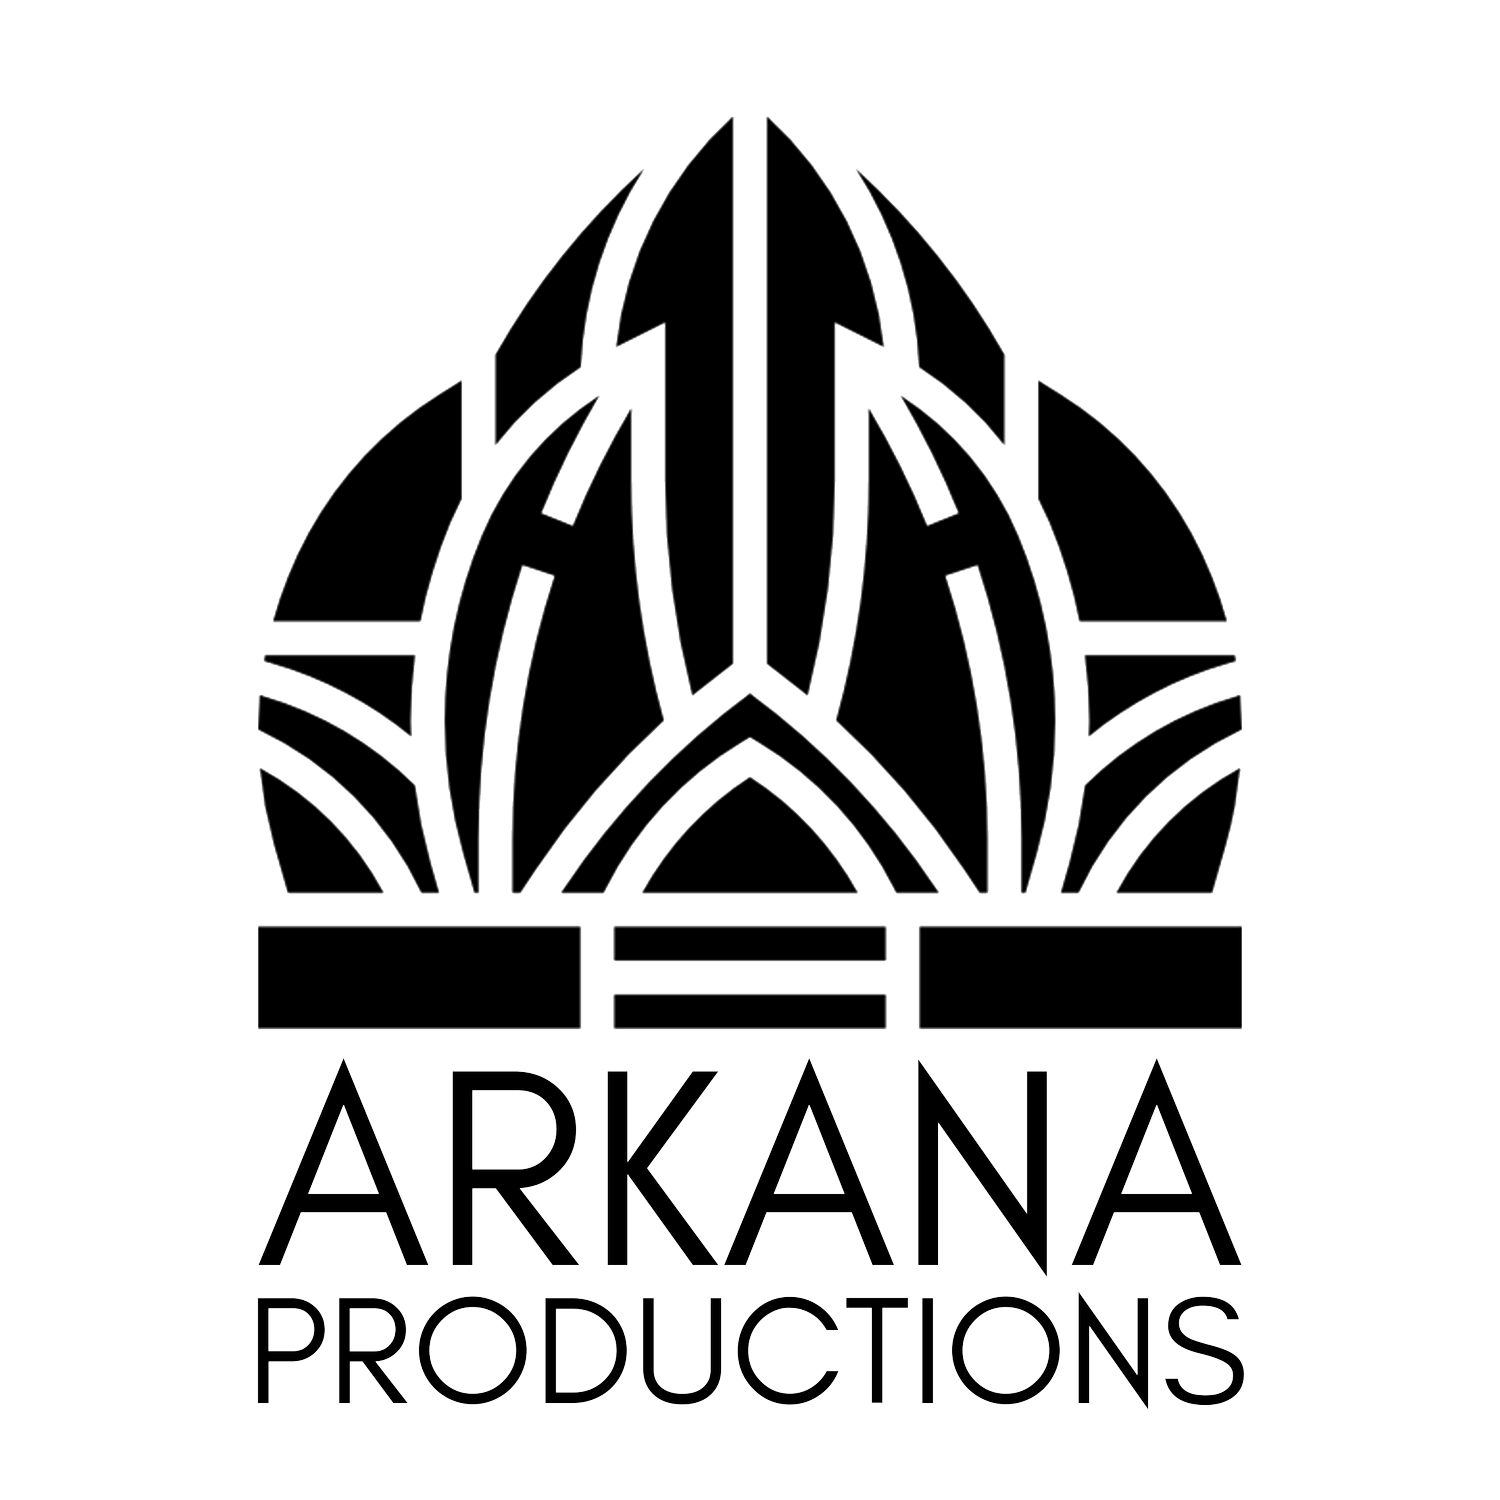 Arkana Productions - New Jersey Video Production and Content Strategy